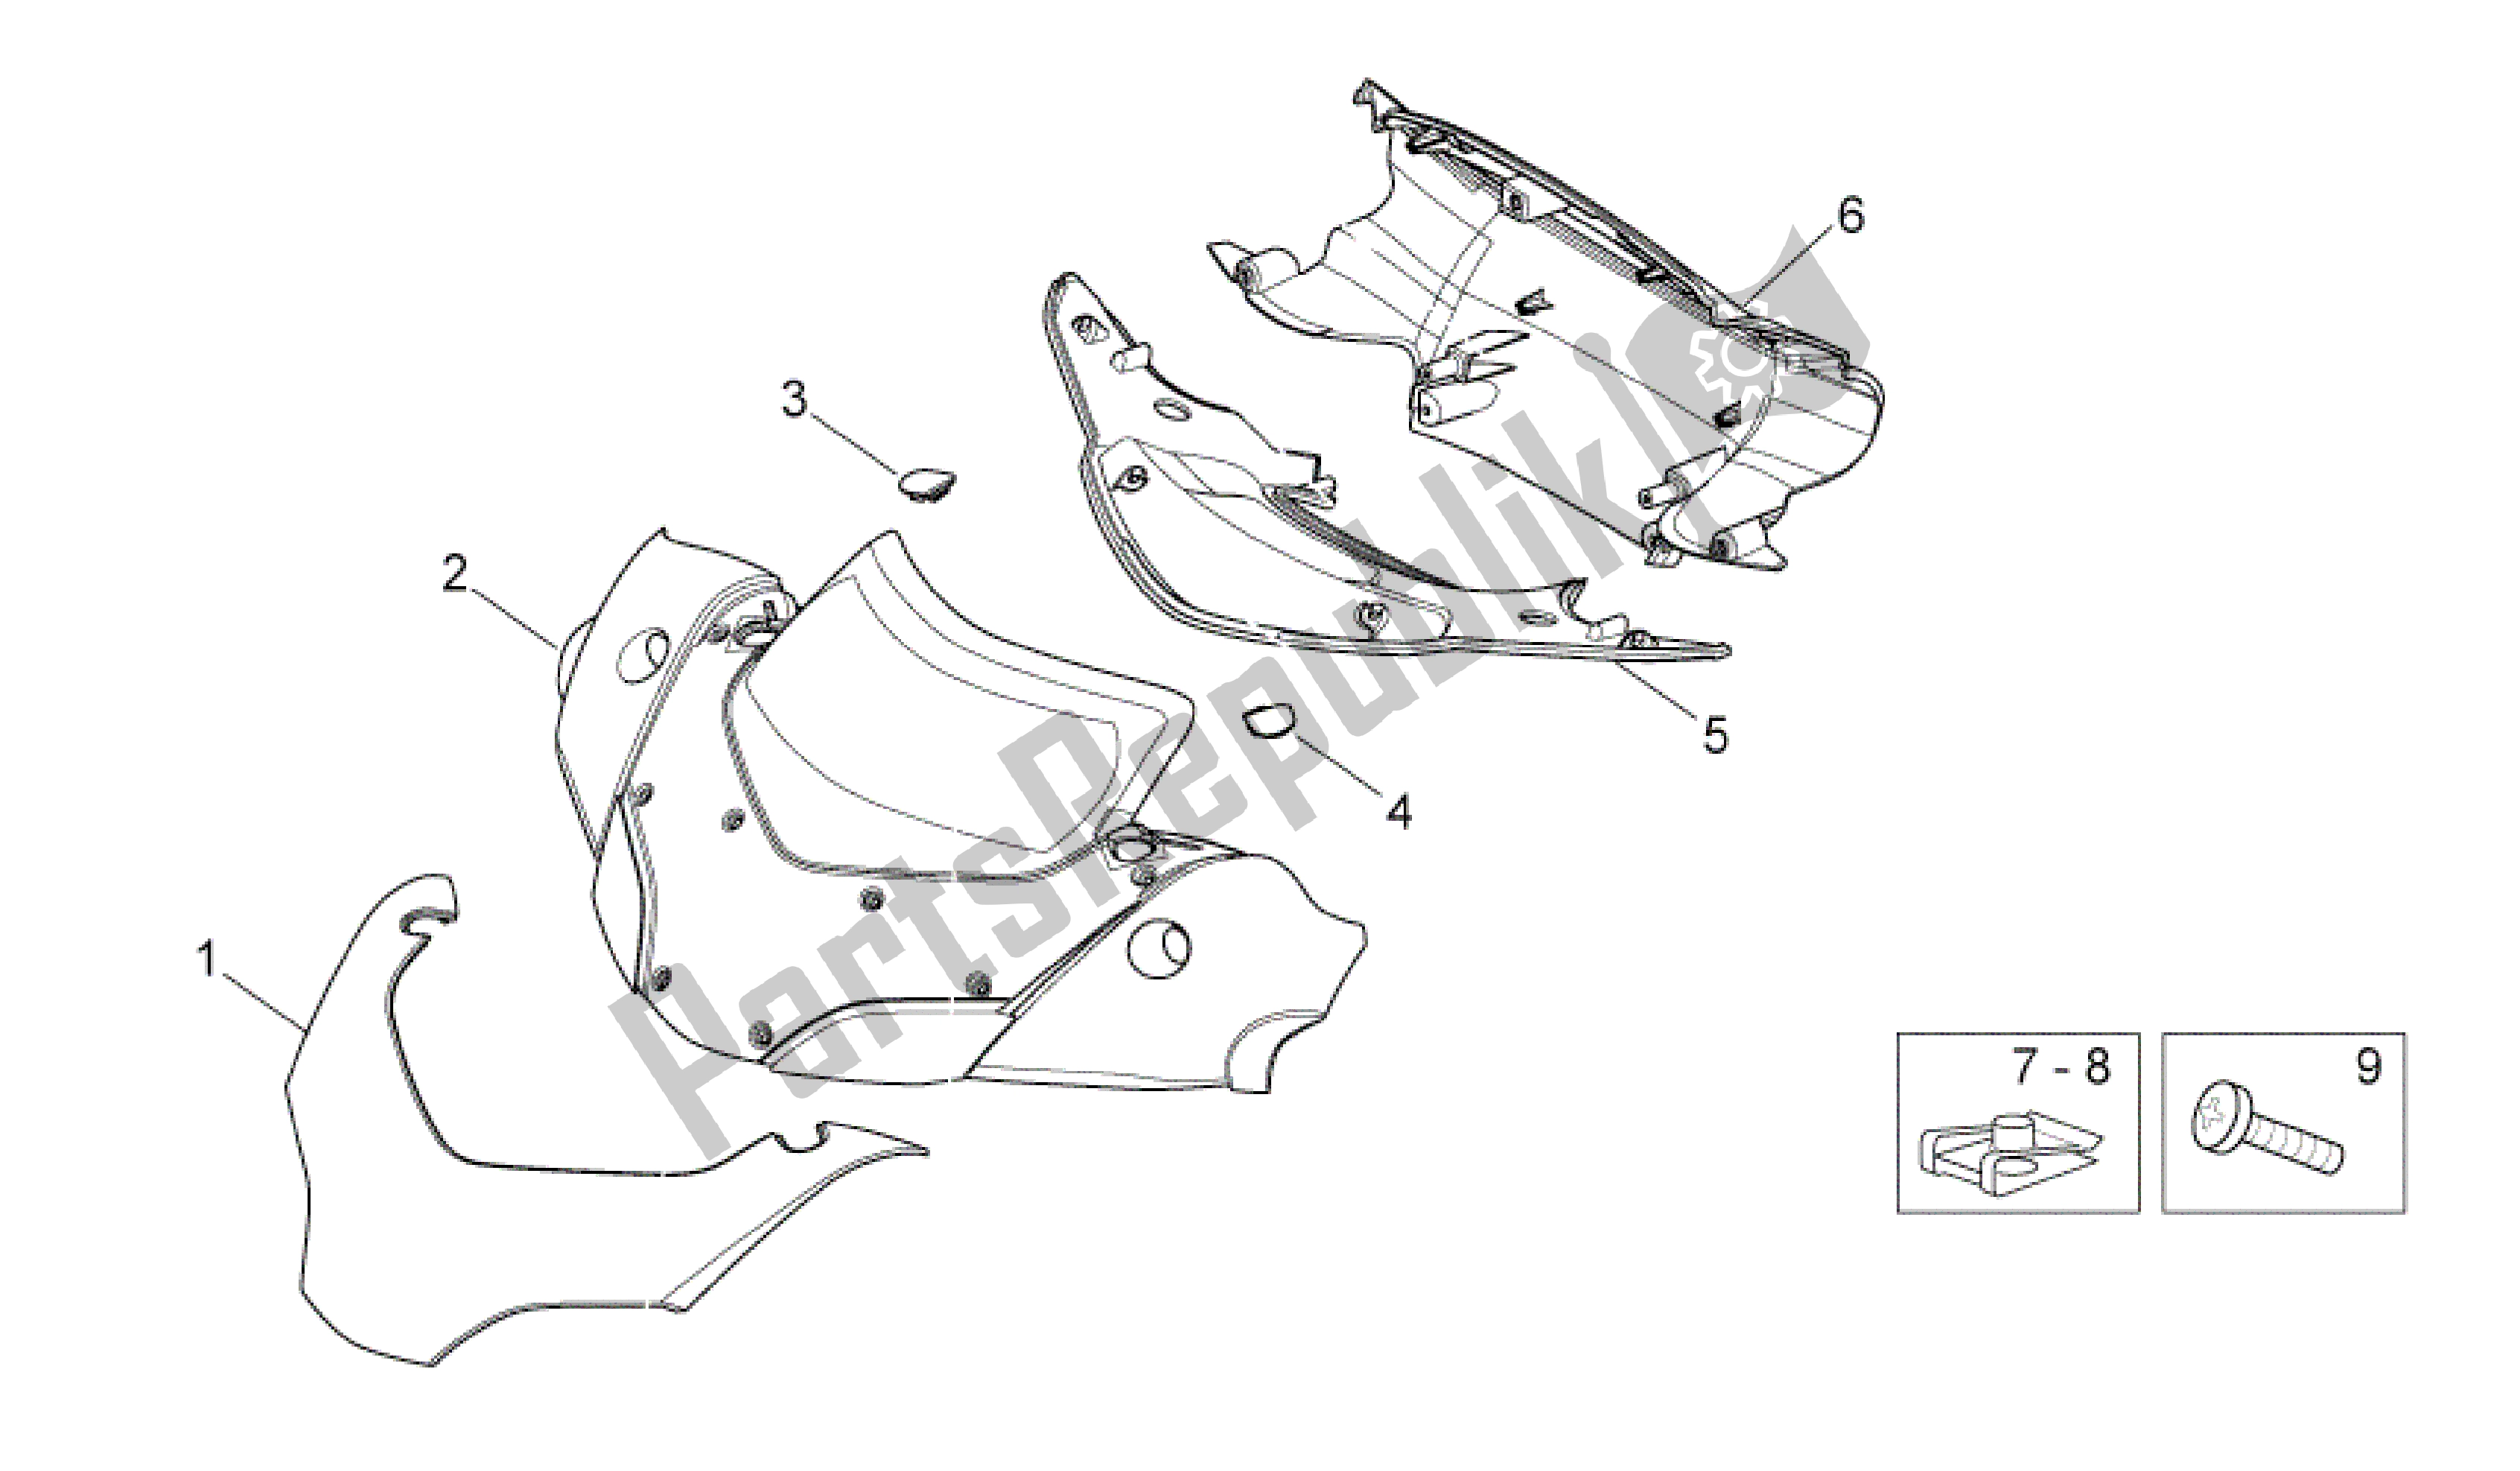 All parts for the Front Body - Front Fairing of the Aprilia Sport City 250 2008 - 2010